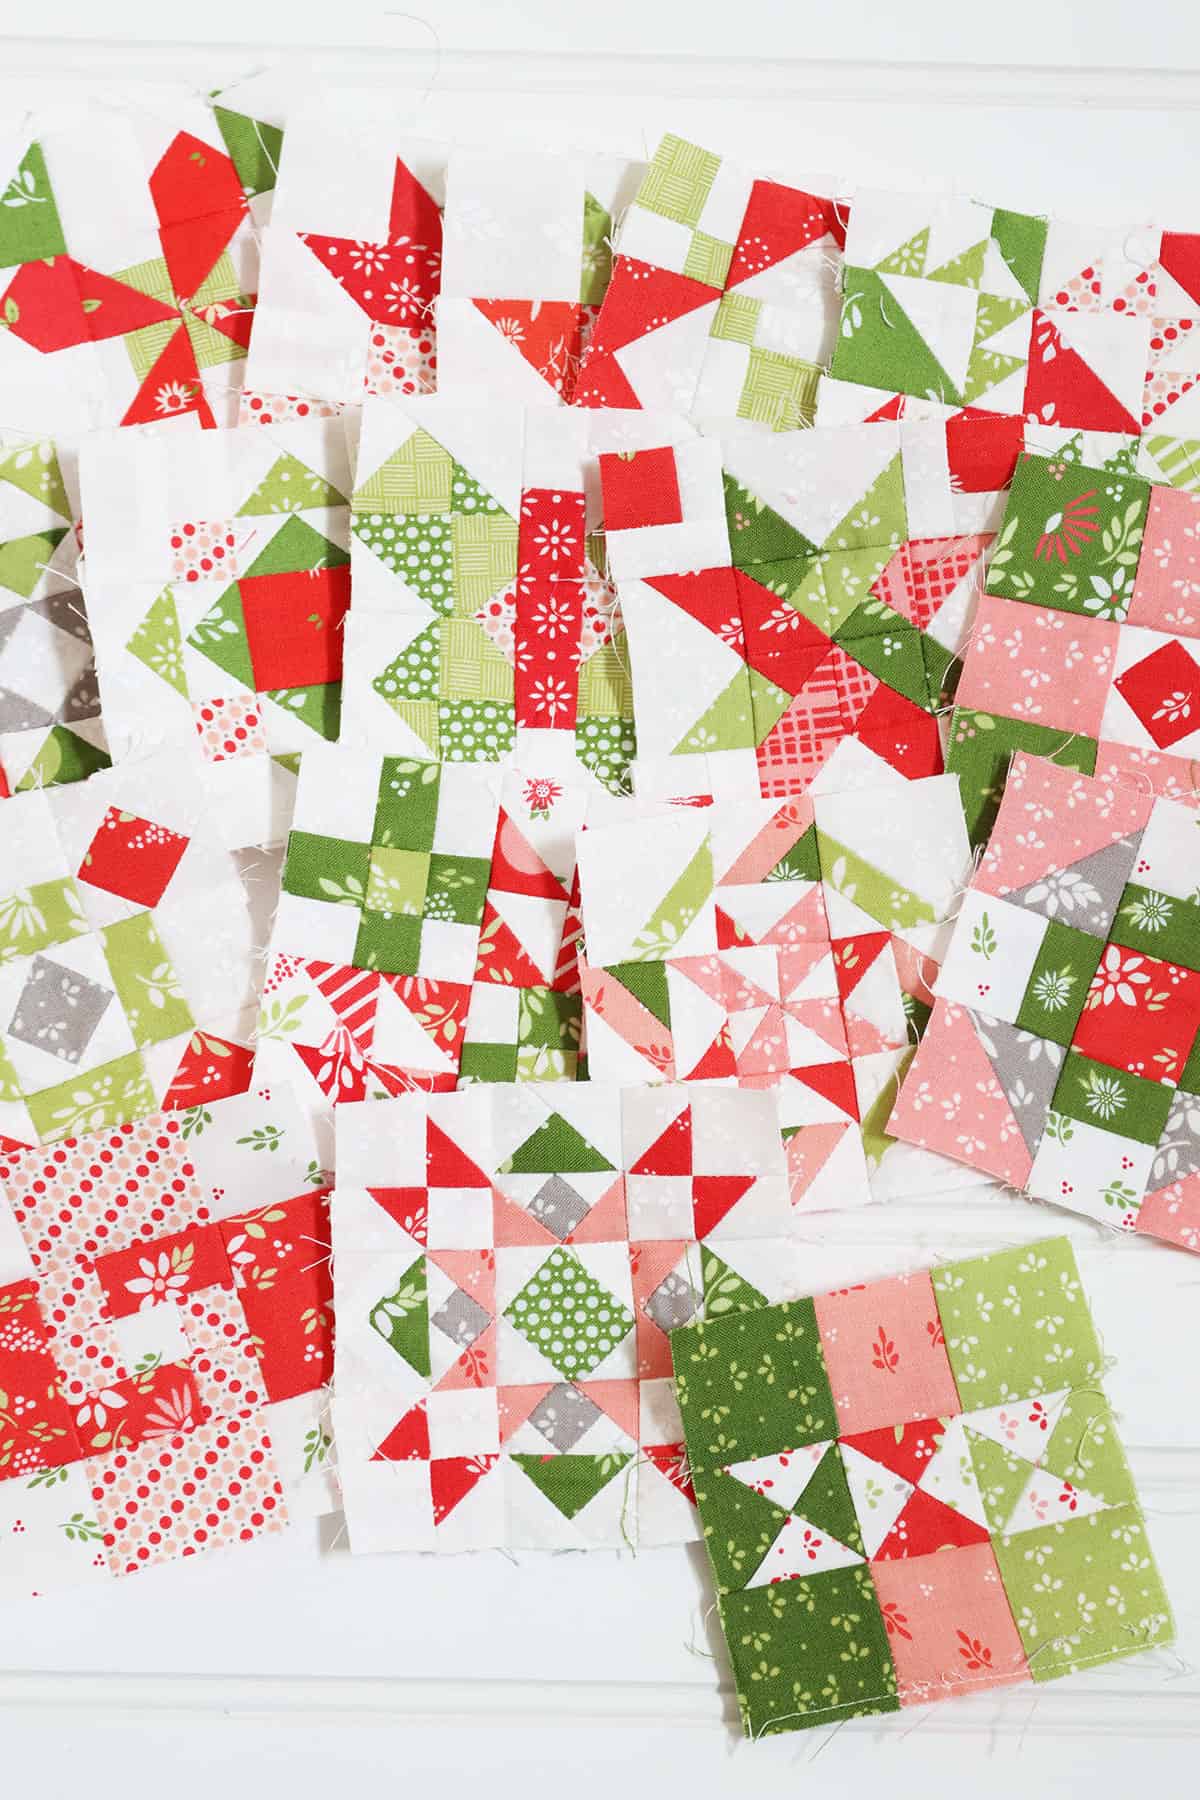 Sewcialites 2 Quilt Block 17 featured by Top US Quilt Blog, A Quilting Life